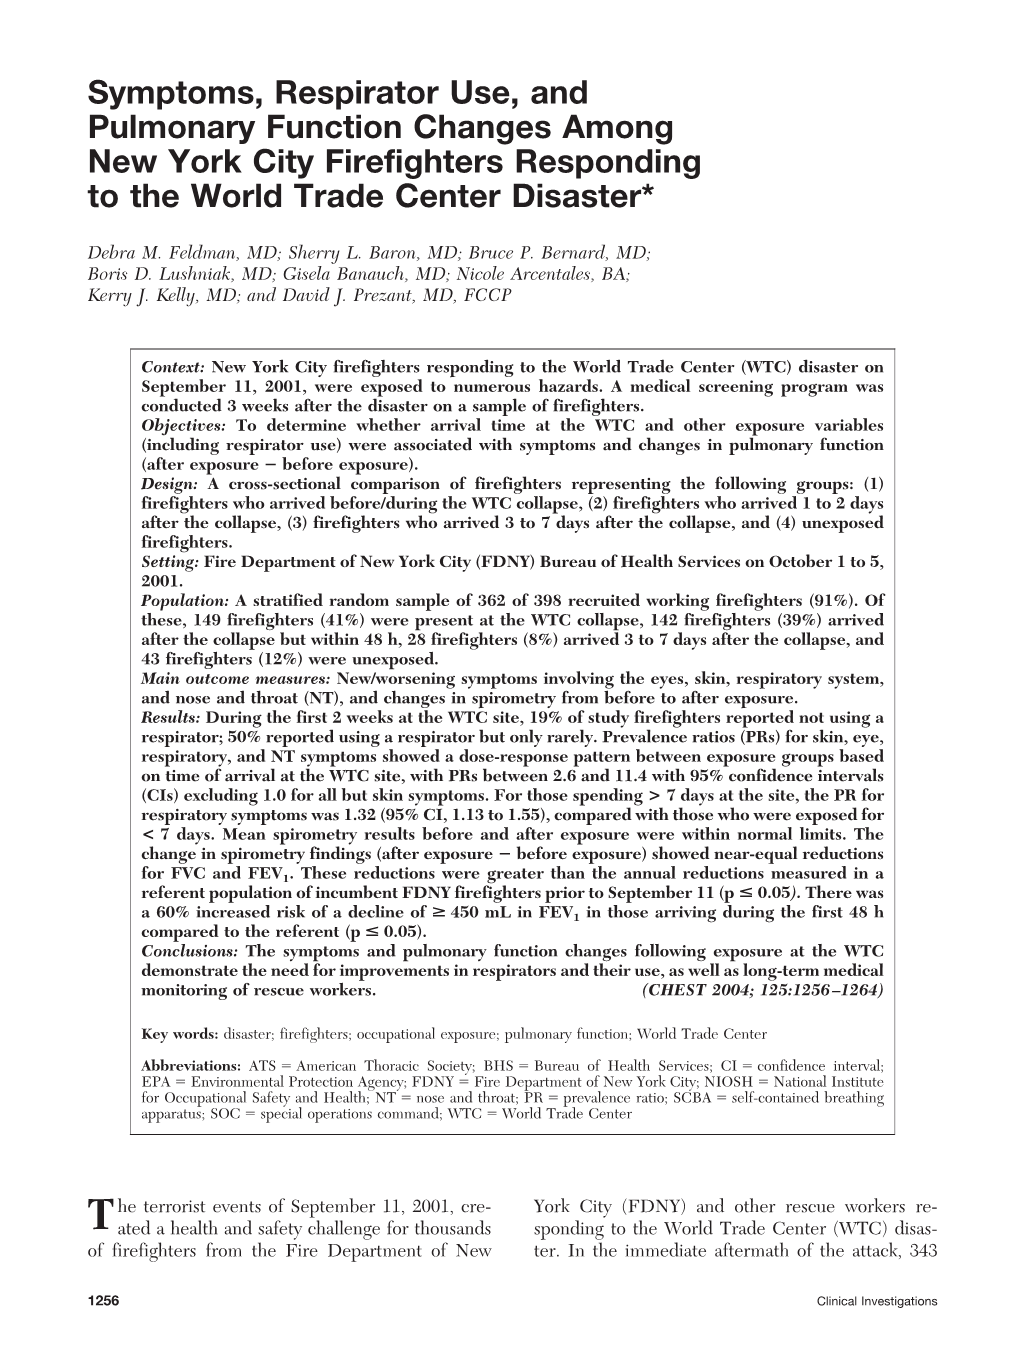 Symptoms, Respirator Use, and Pulmonary Function Changes Among New York City Firefighters Responding to the World Trade Center Disaster*